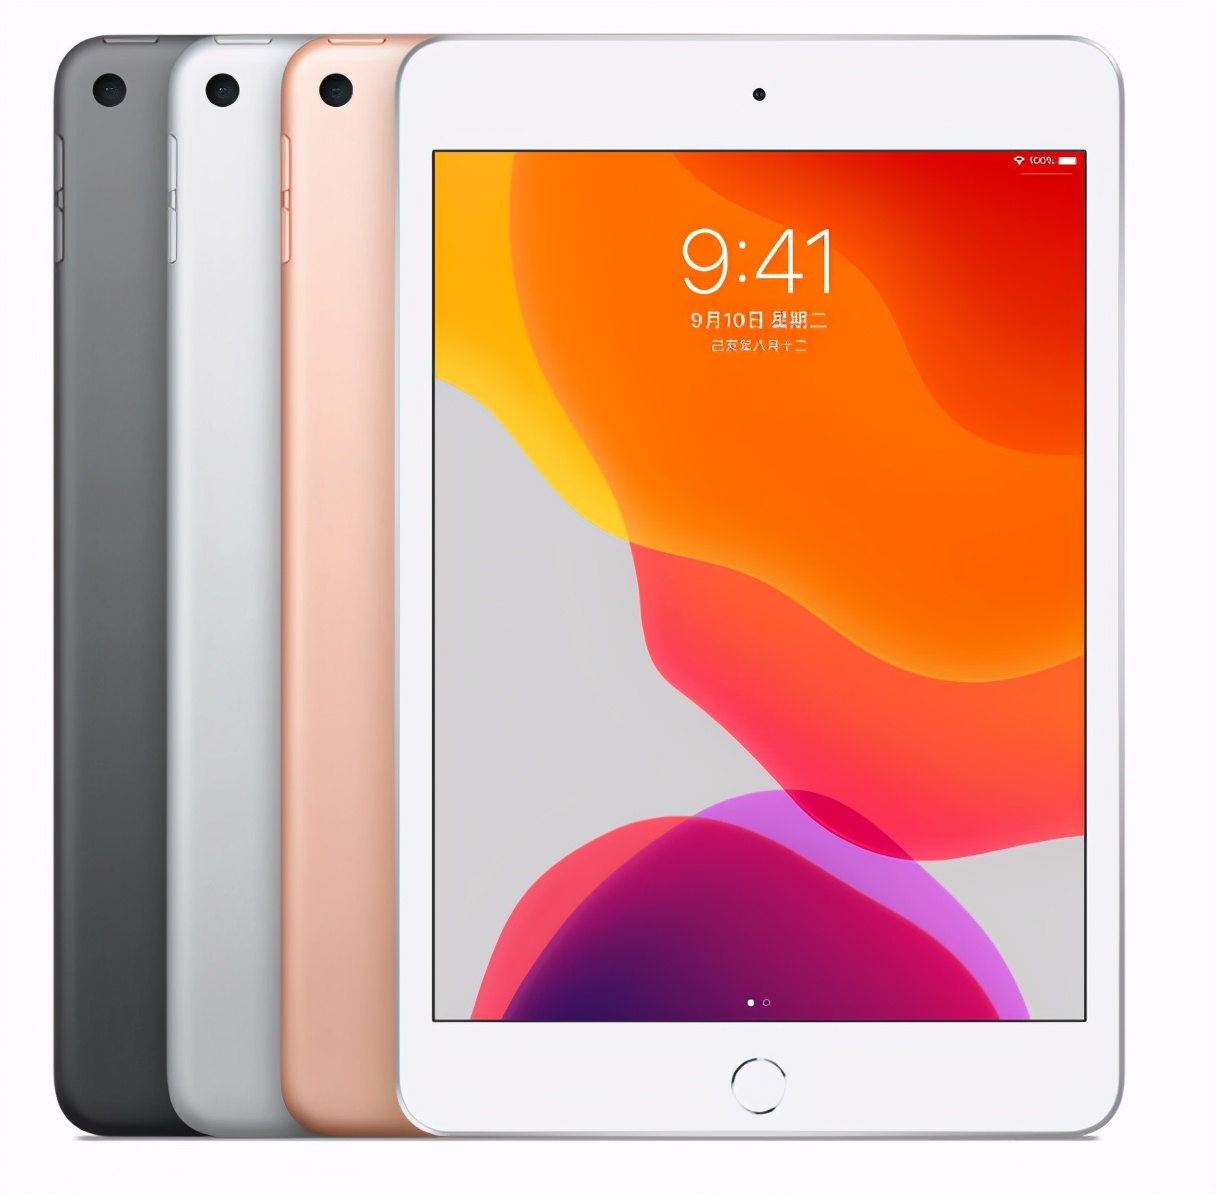 Apple iPad 9.7-inch Review - Buy this high-end device for powerful ...